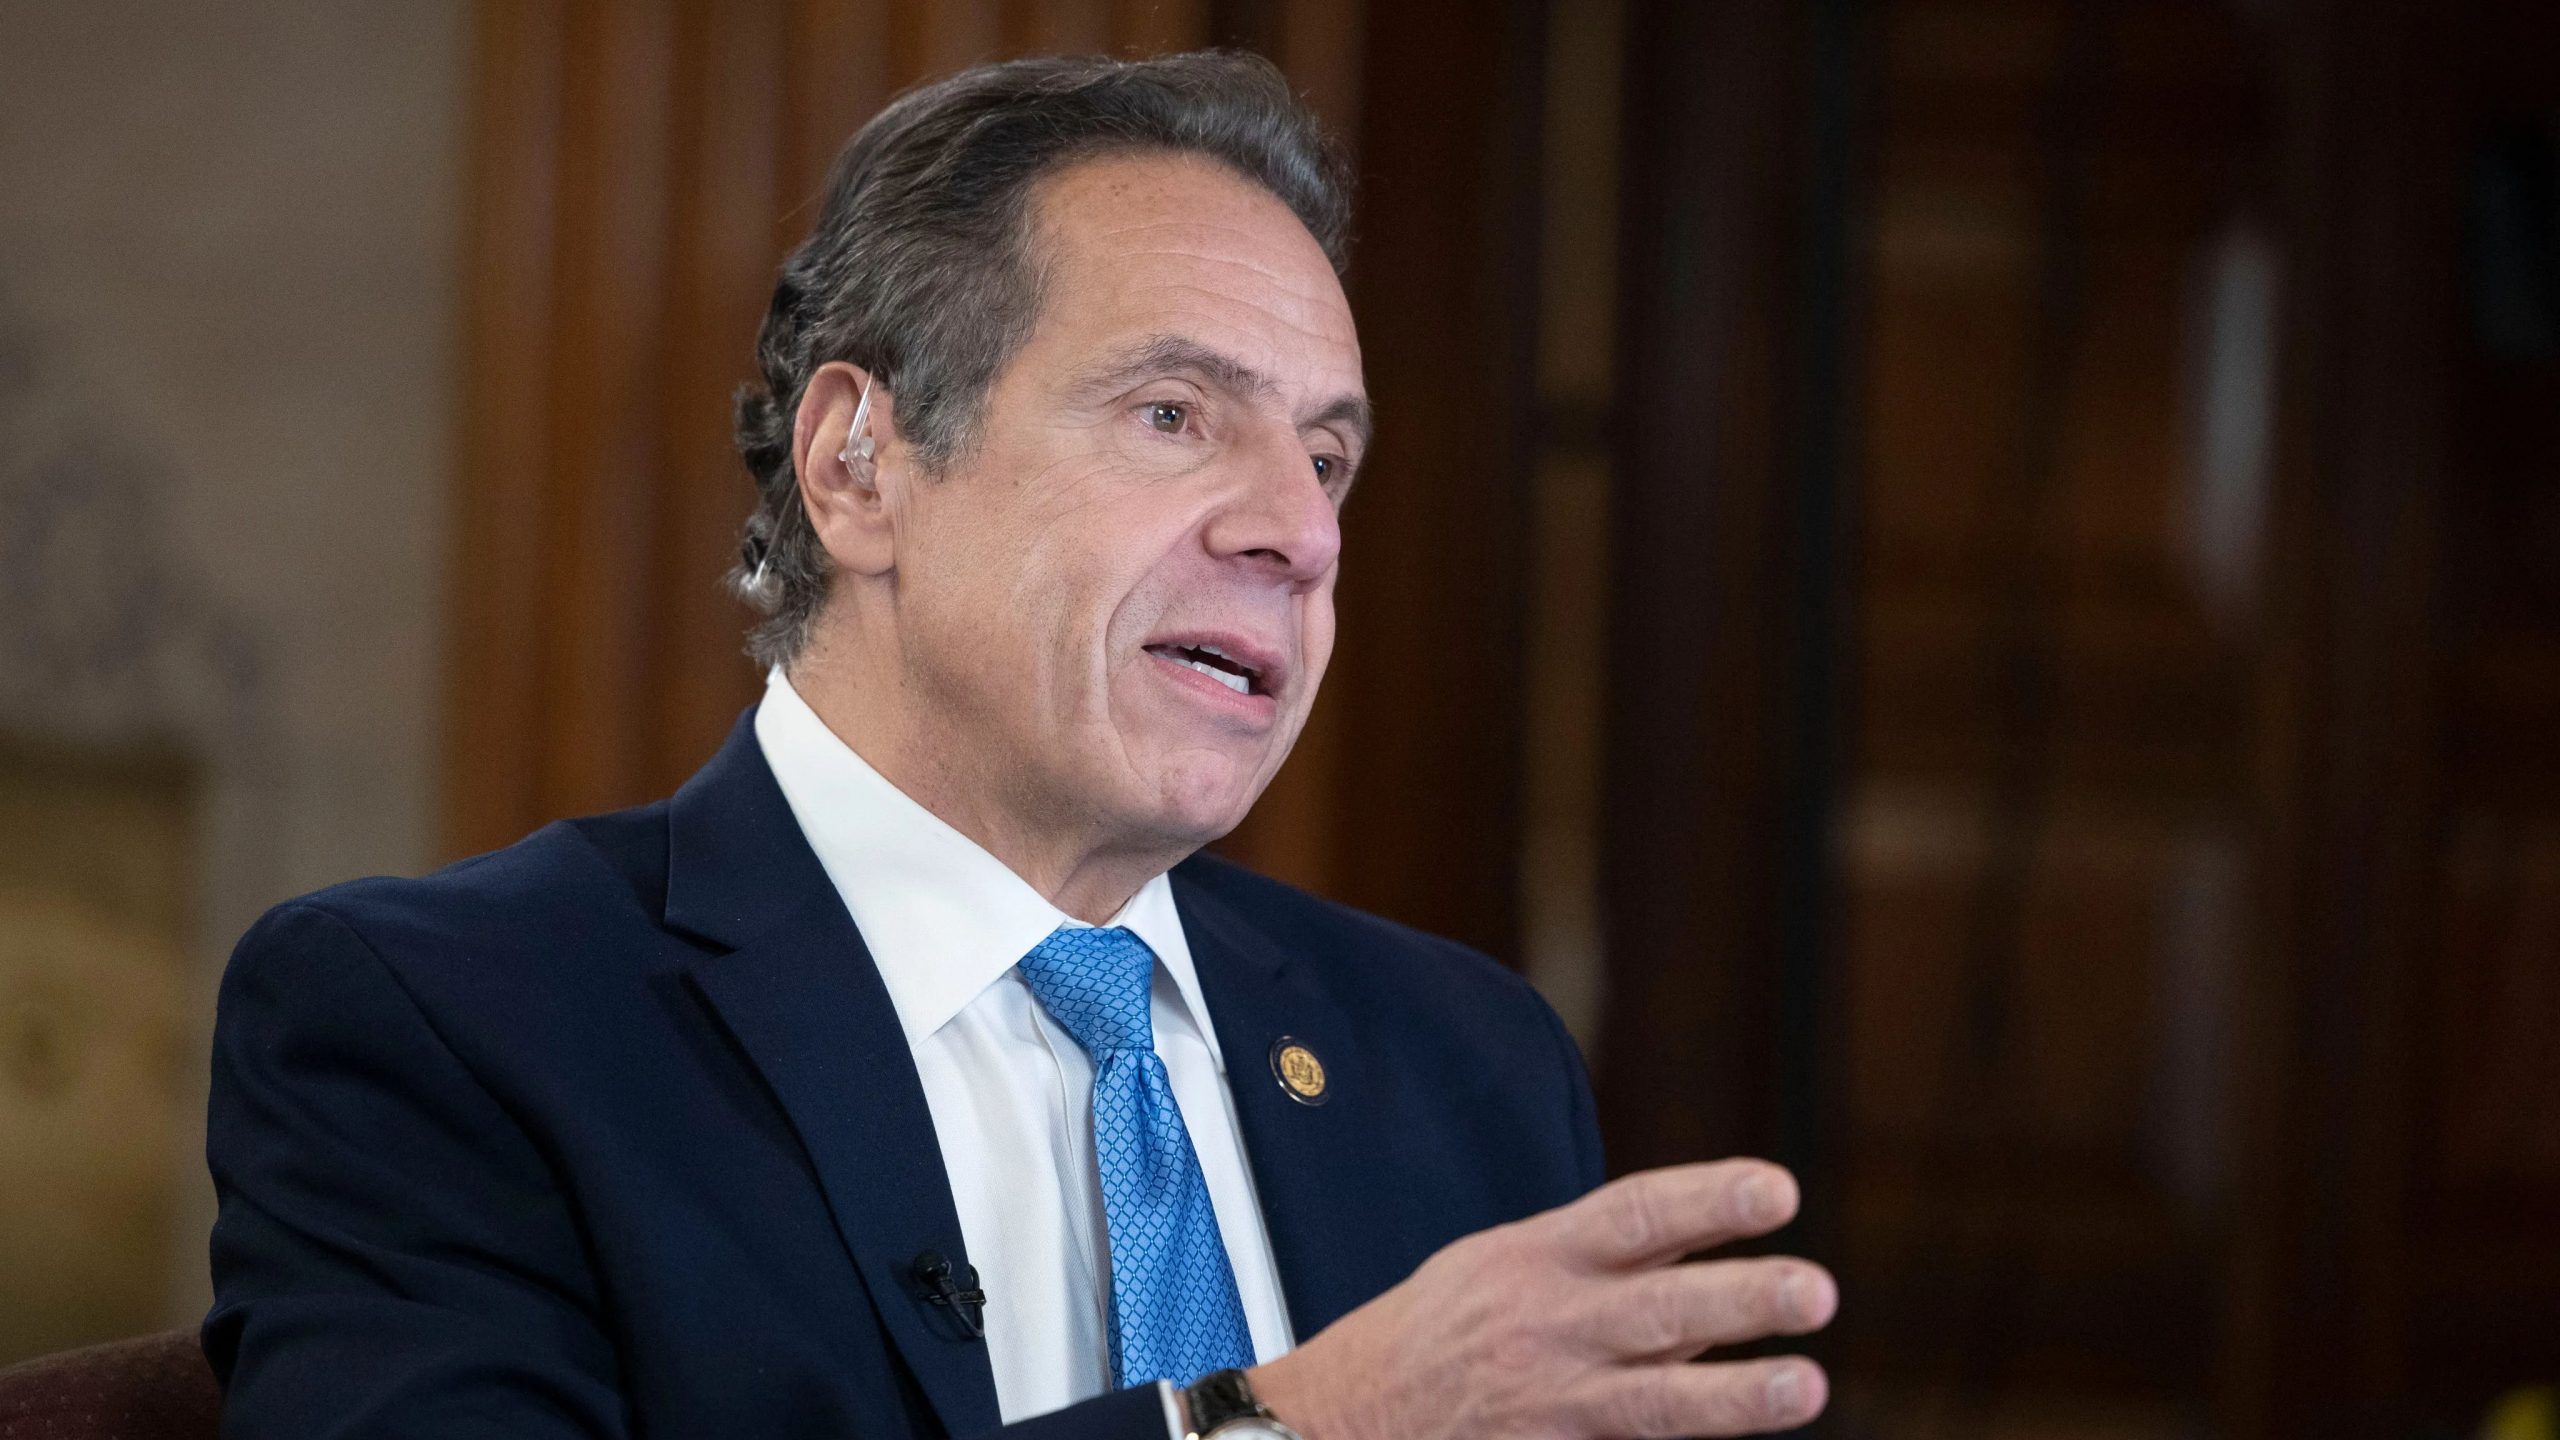 New York Senate votes to repeal Andrew Cuomo’s expanded emergency executive powers